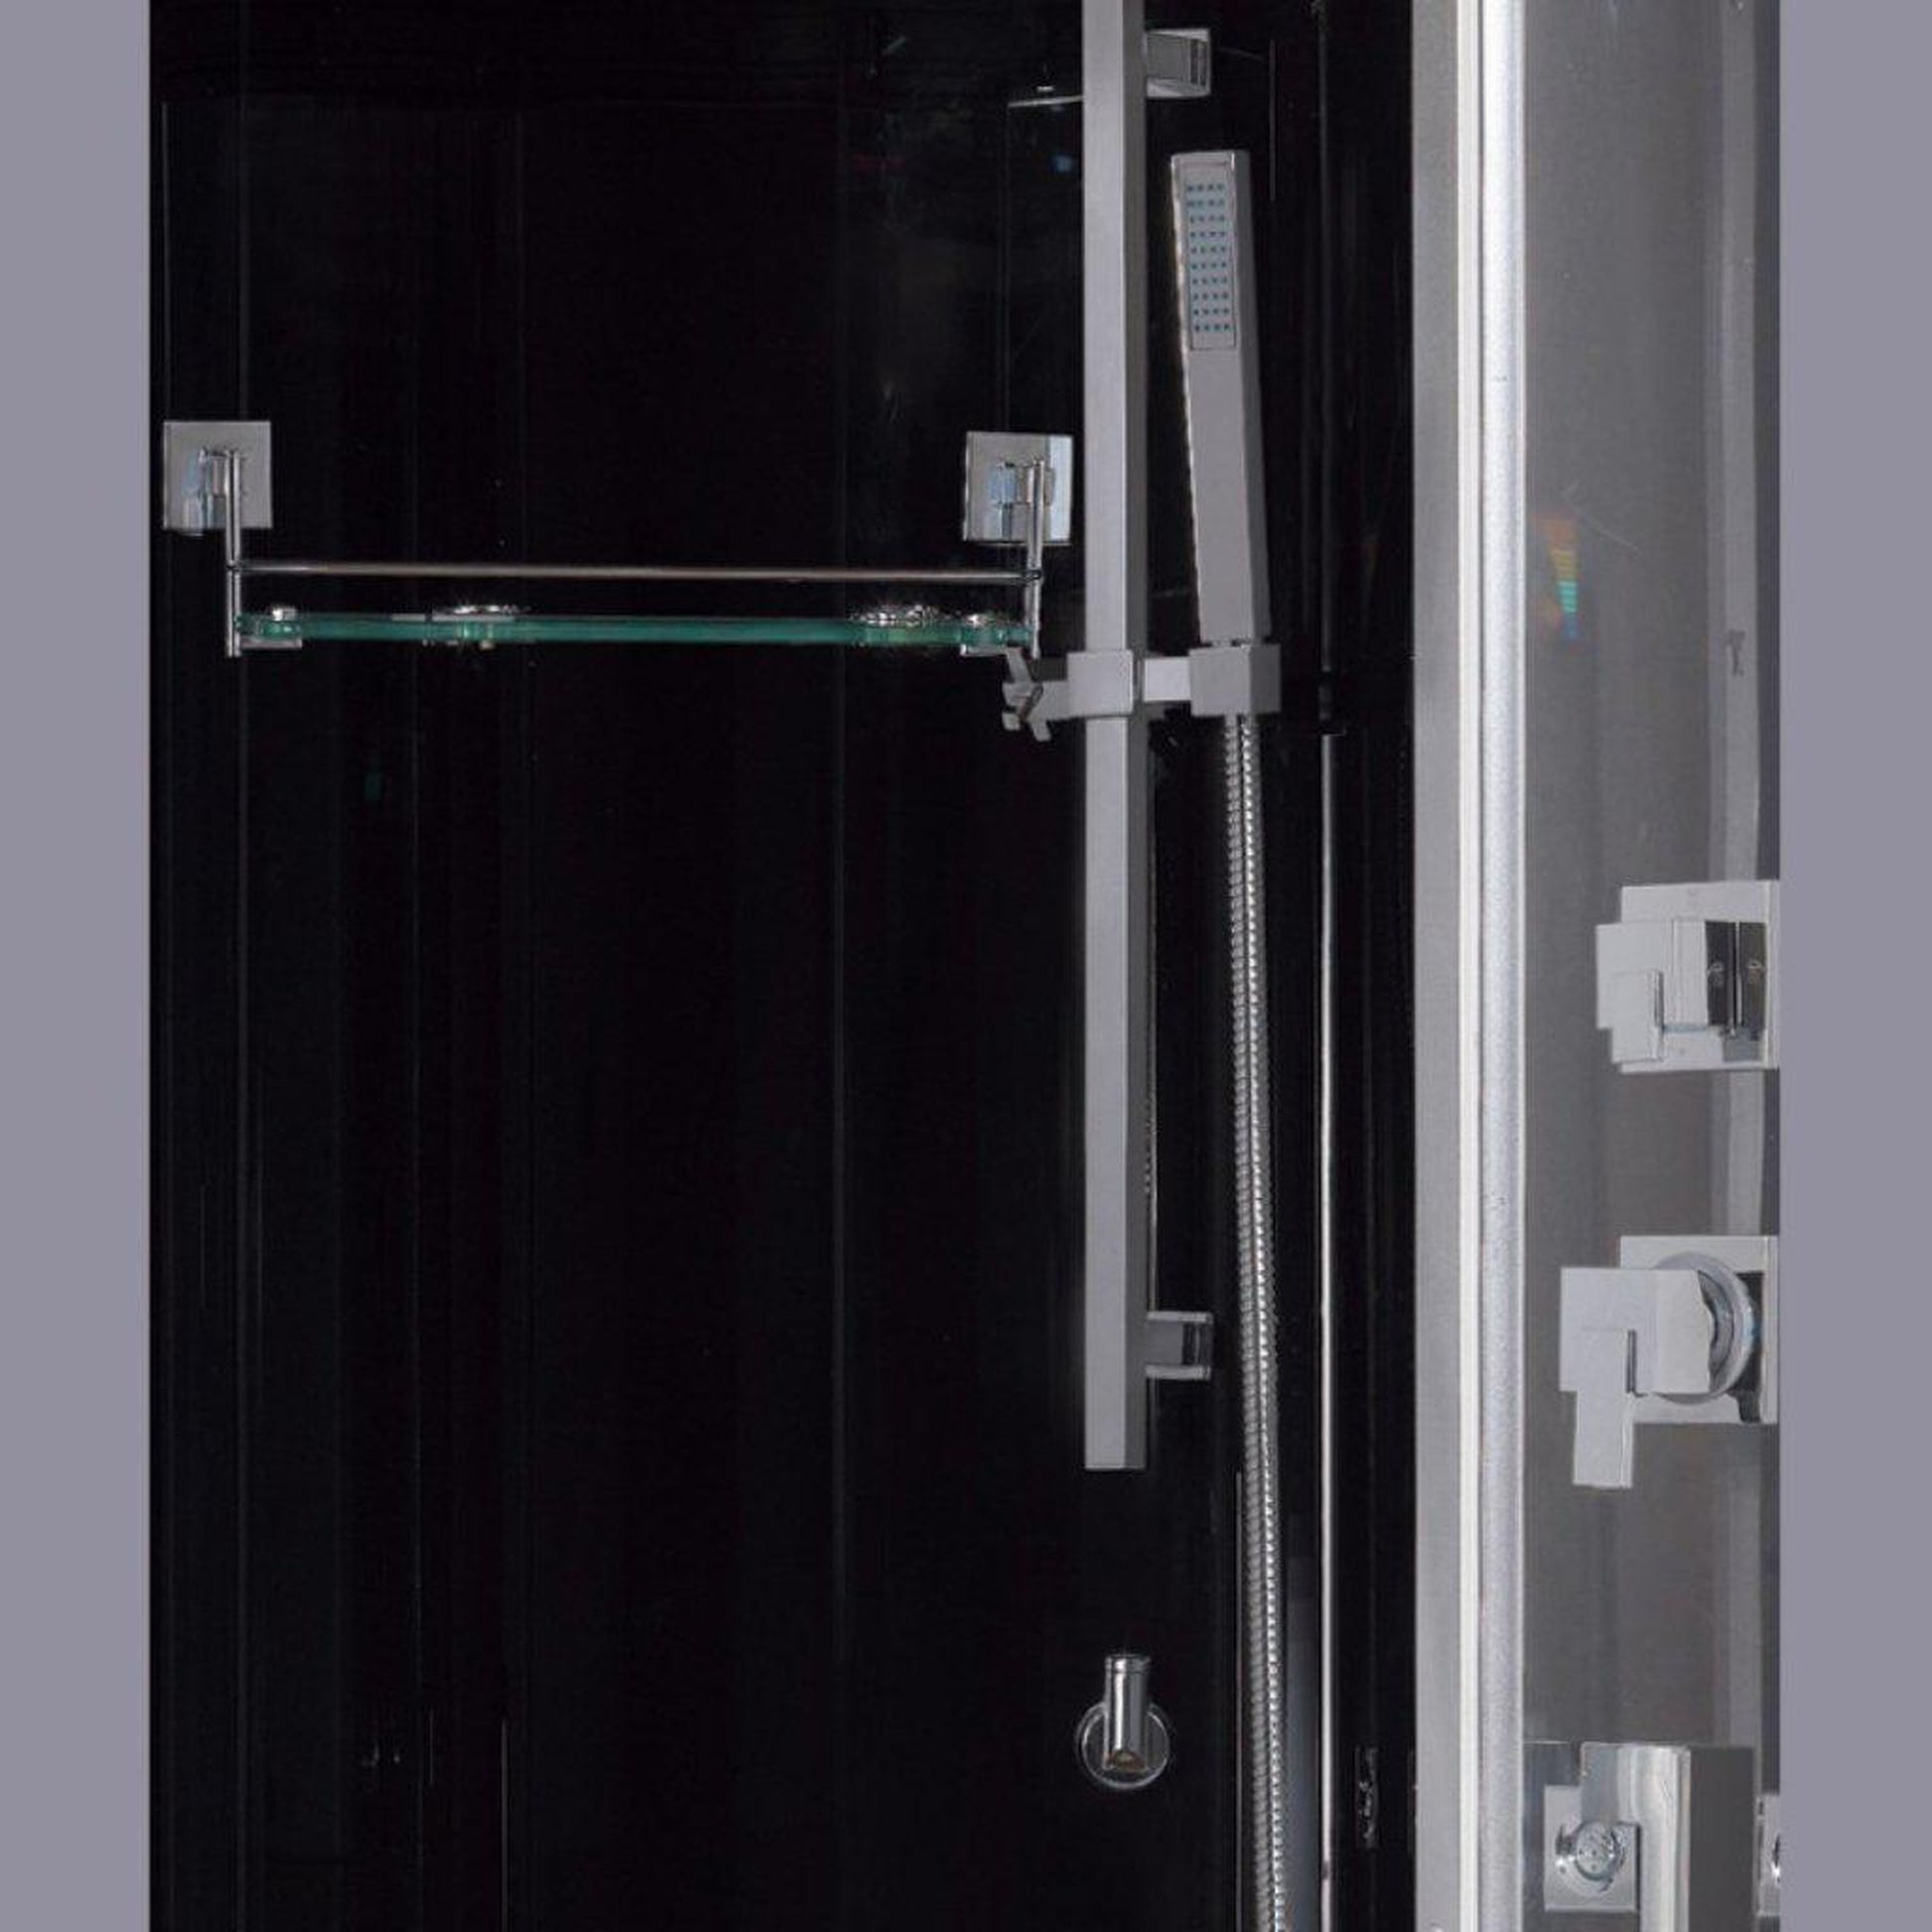 Platinum 47" x 47" x 89" Two-Person Black Framed Round Walk-In Steam Shower With Dual Sliding Doors 12 Massage Jets & LED Chromatherapy Lighting